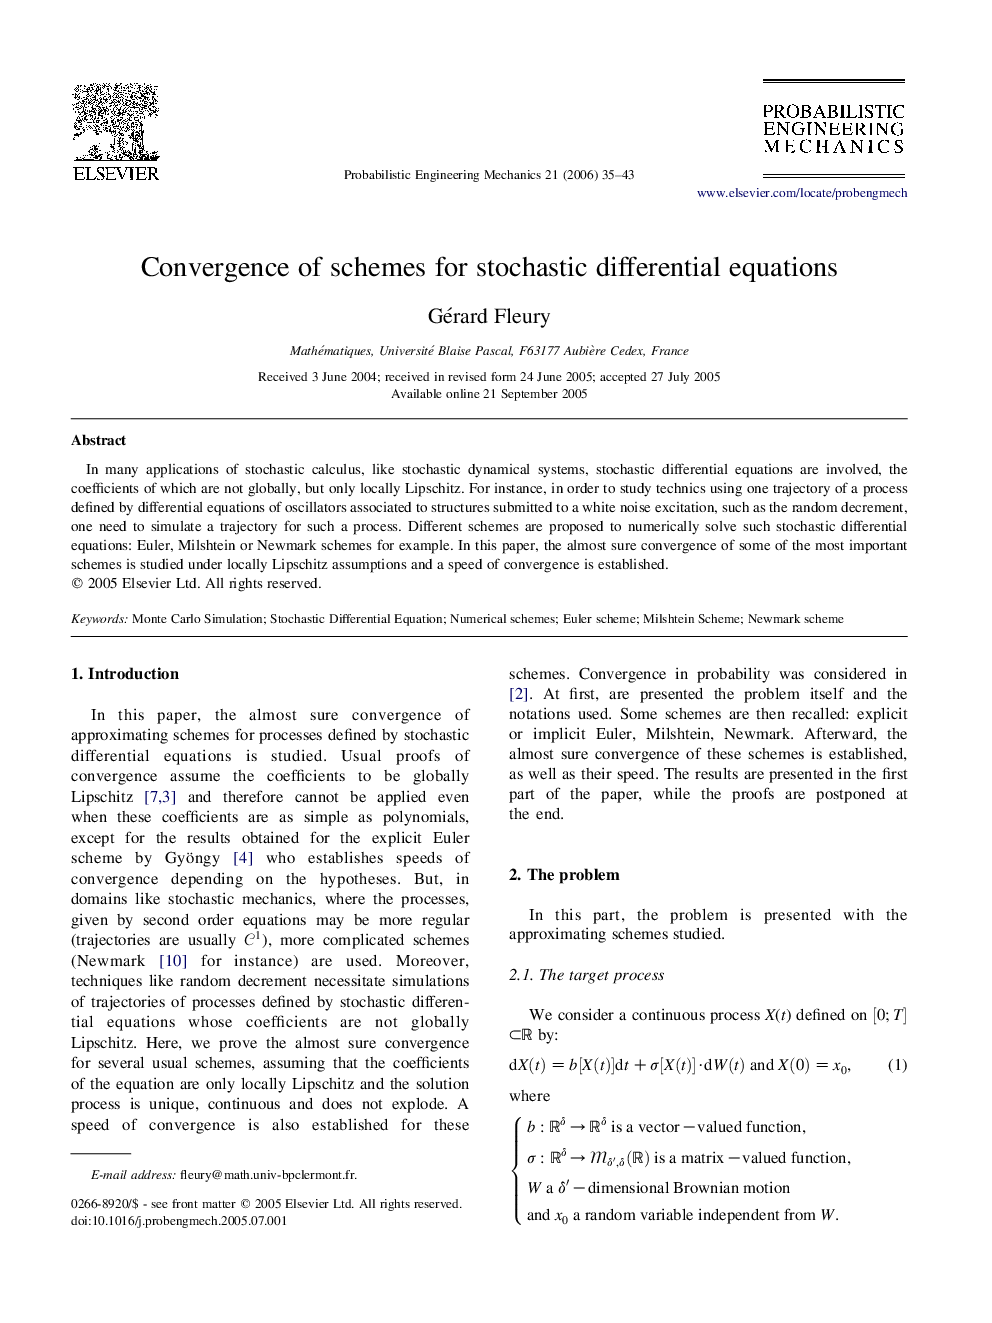 Convergence of schemes for stochastic differential equations